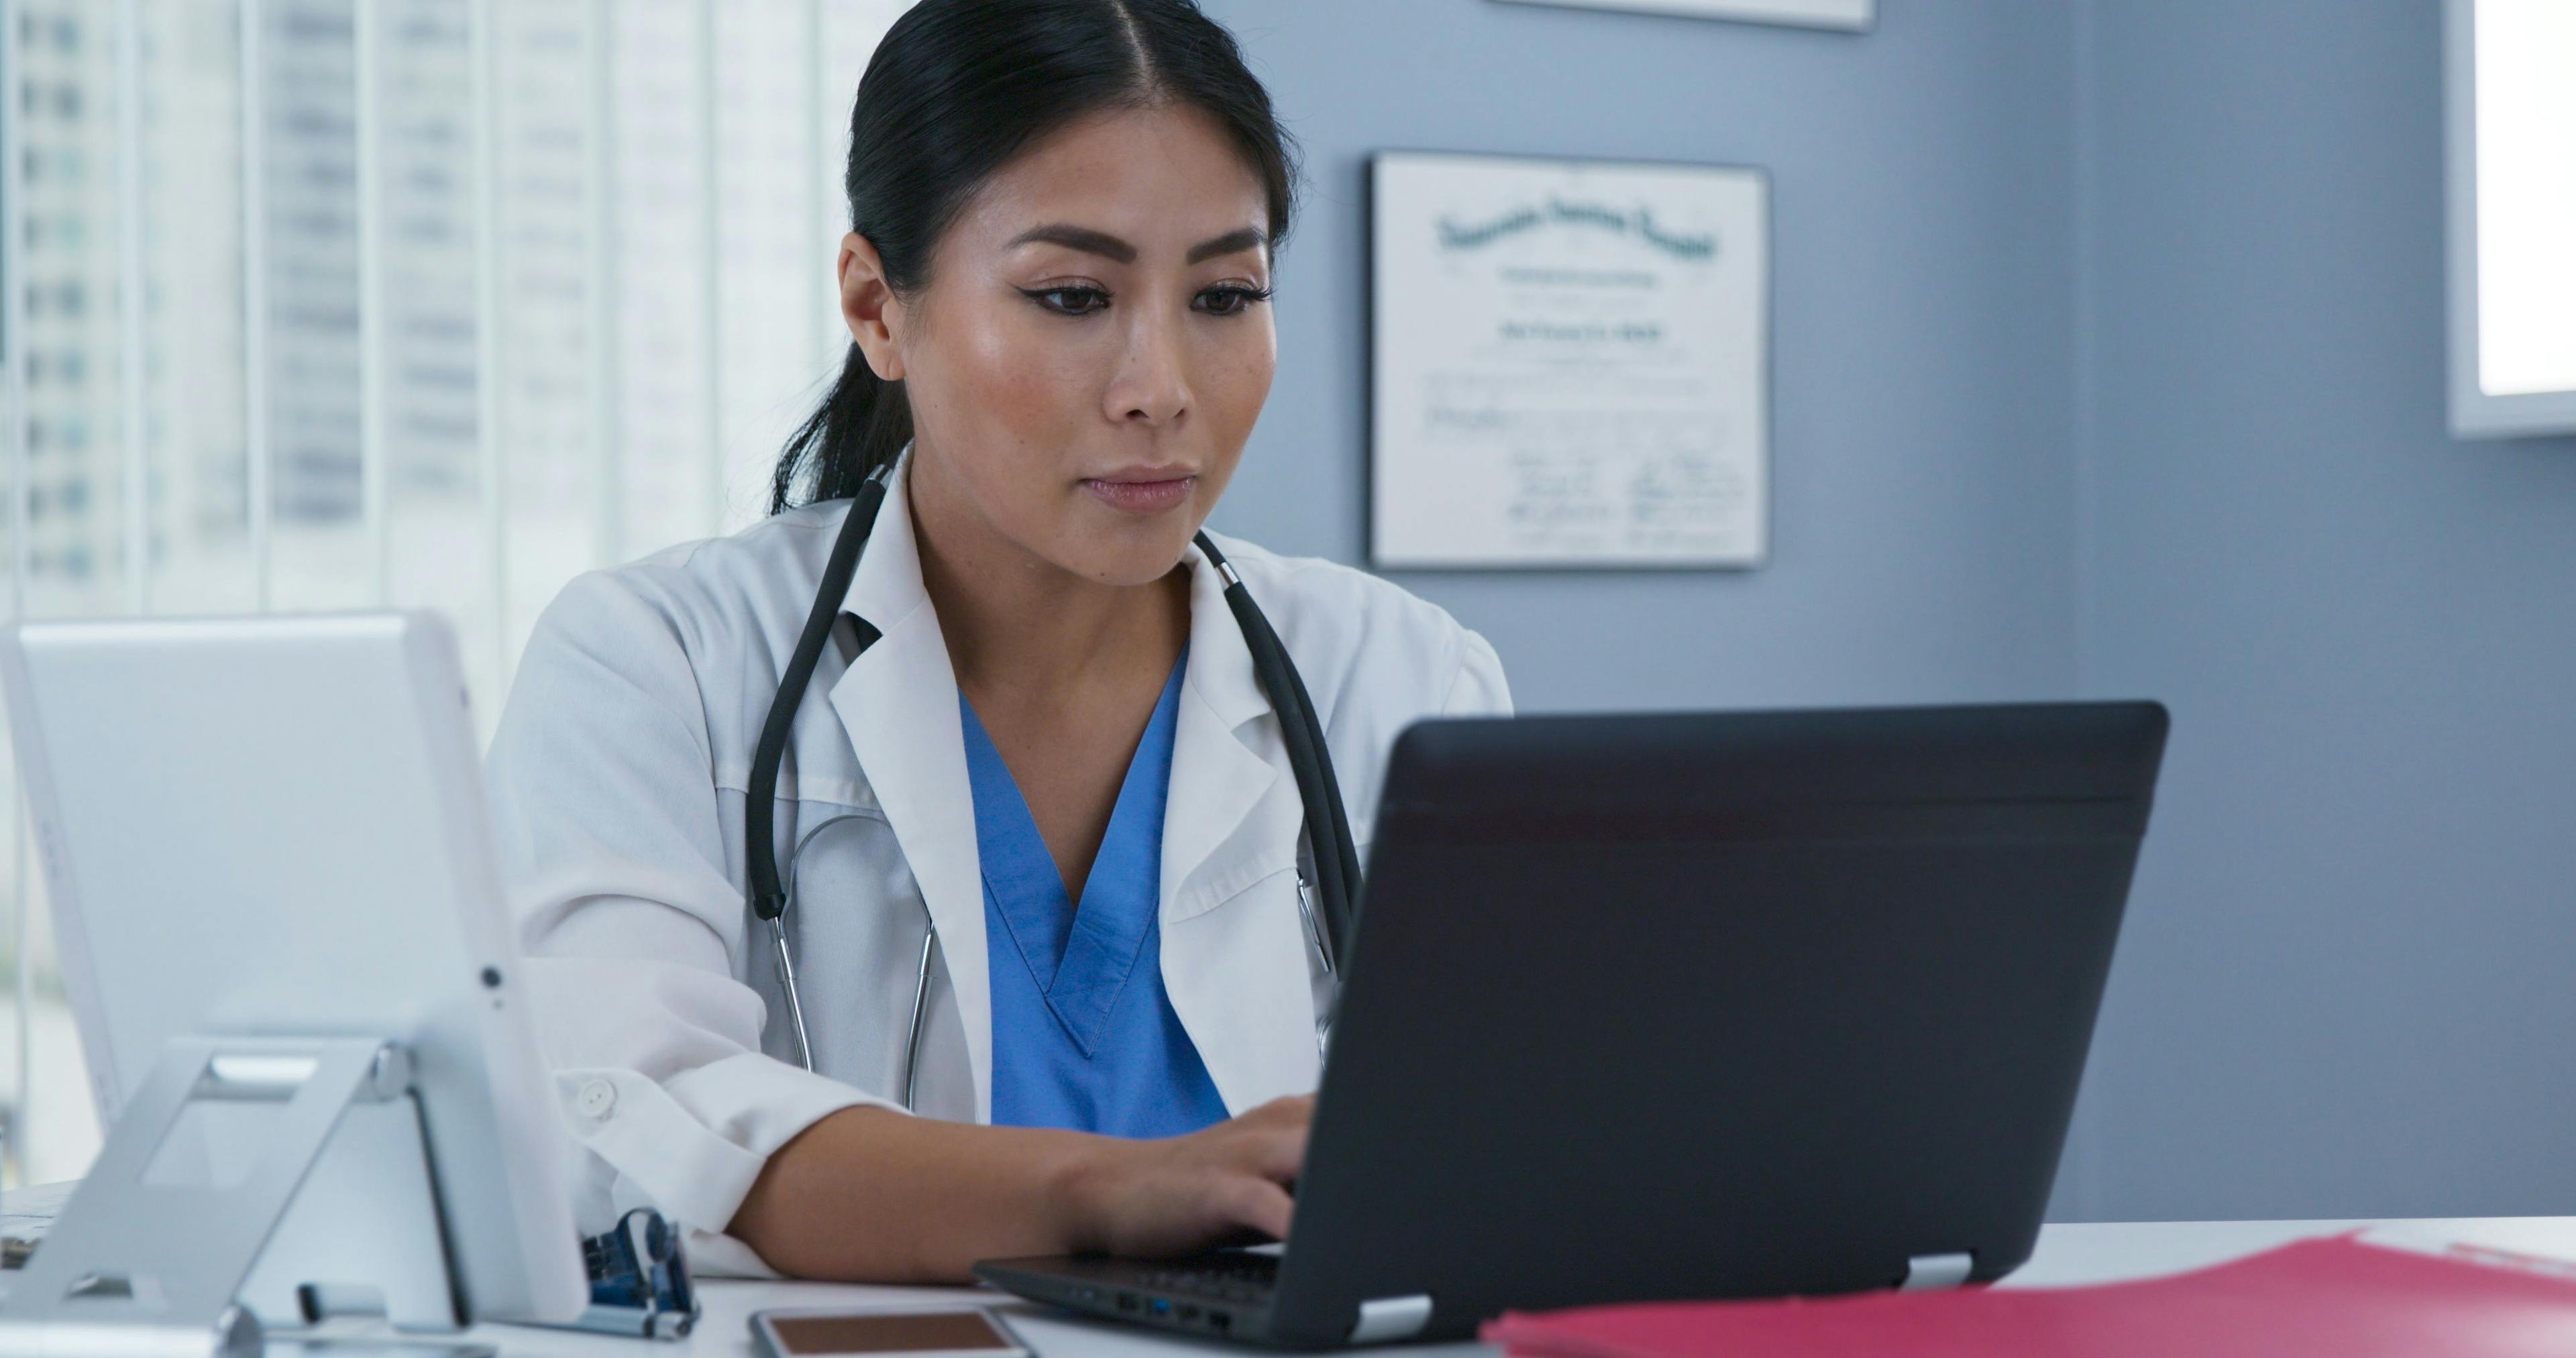 Female doctors earn $2M less over their careers